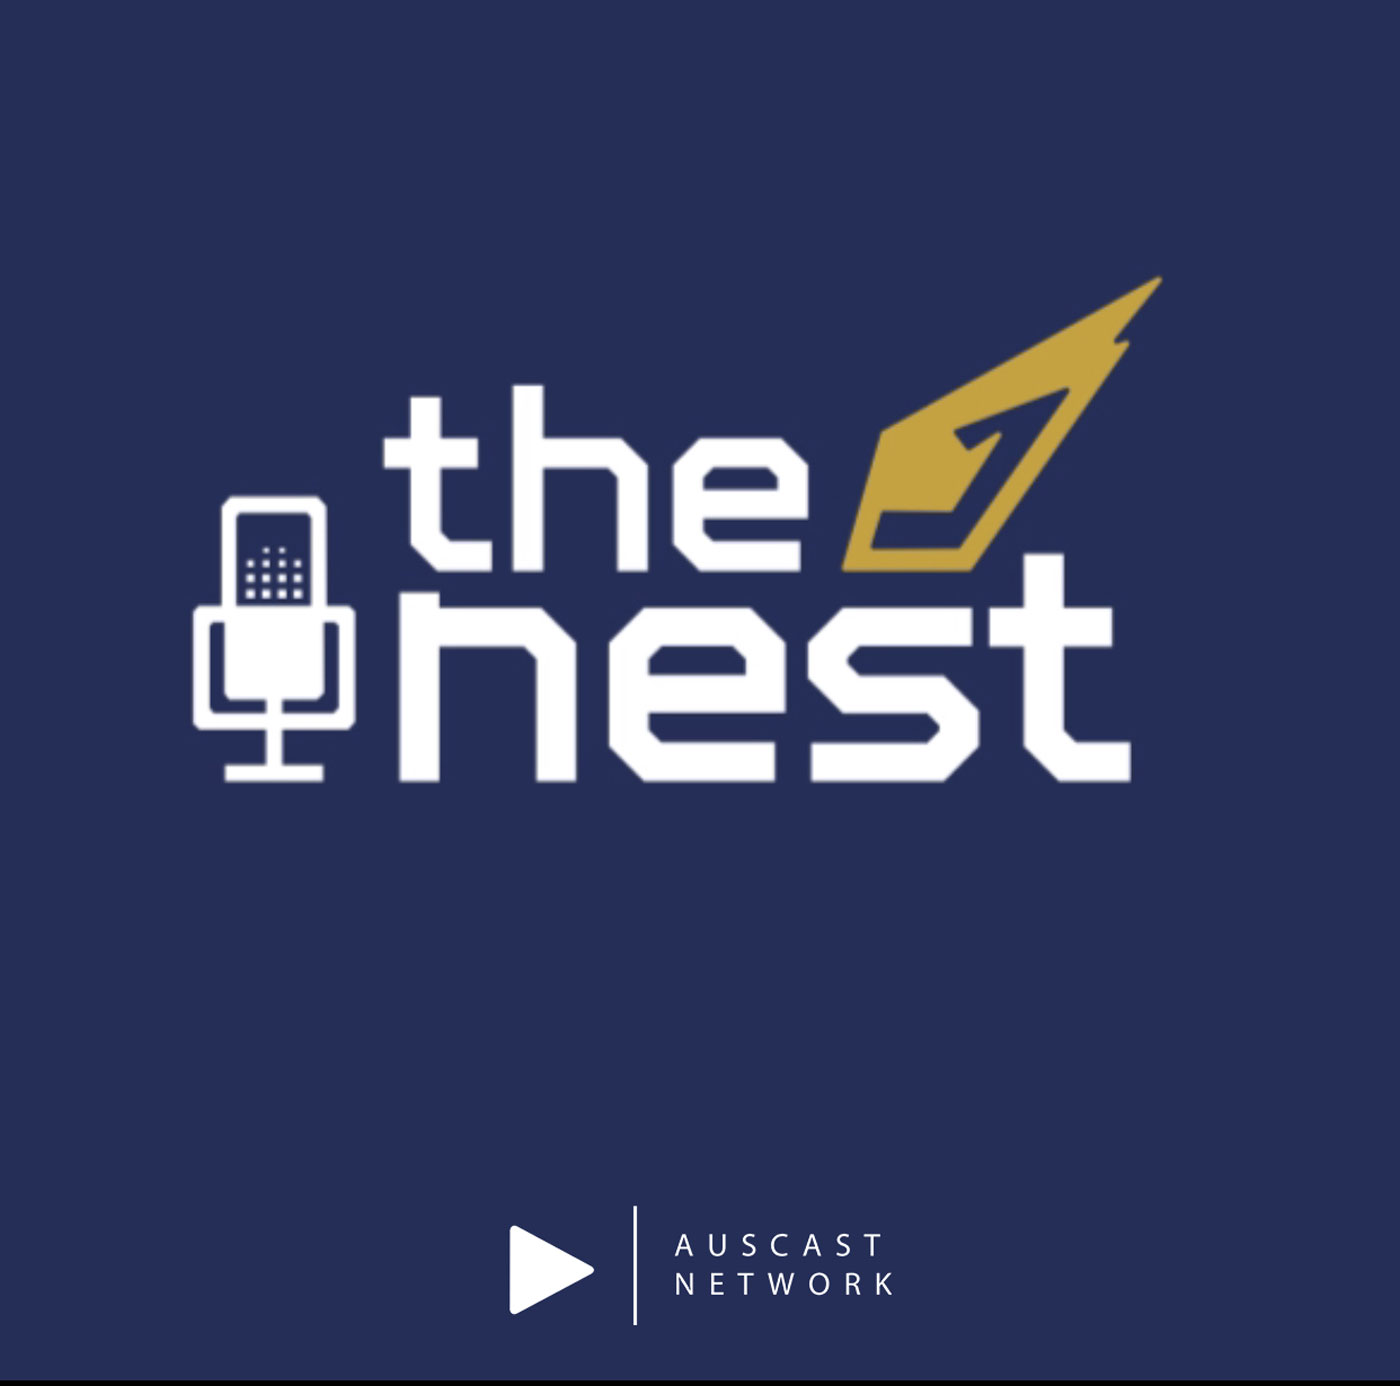 State of the Union Address - The Nest